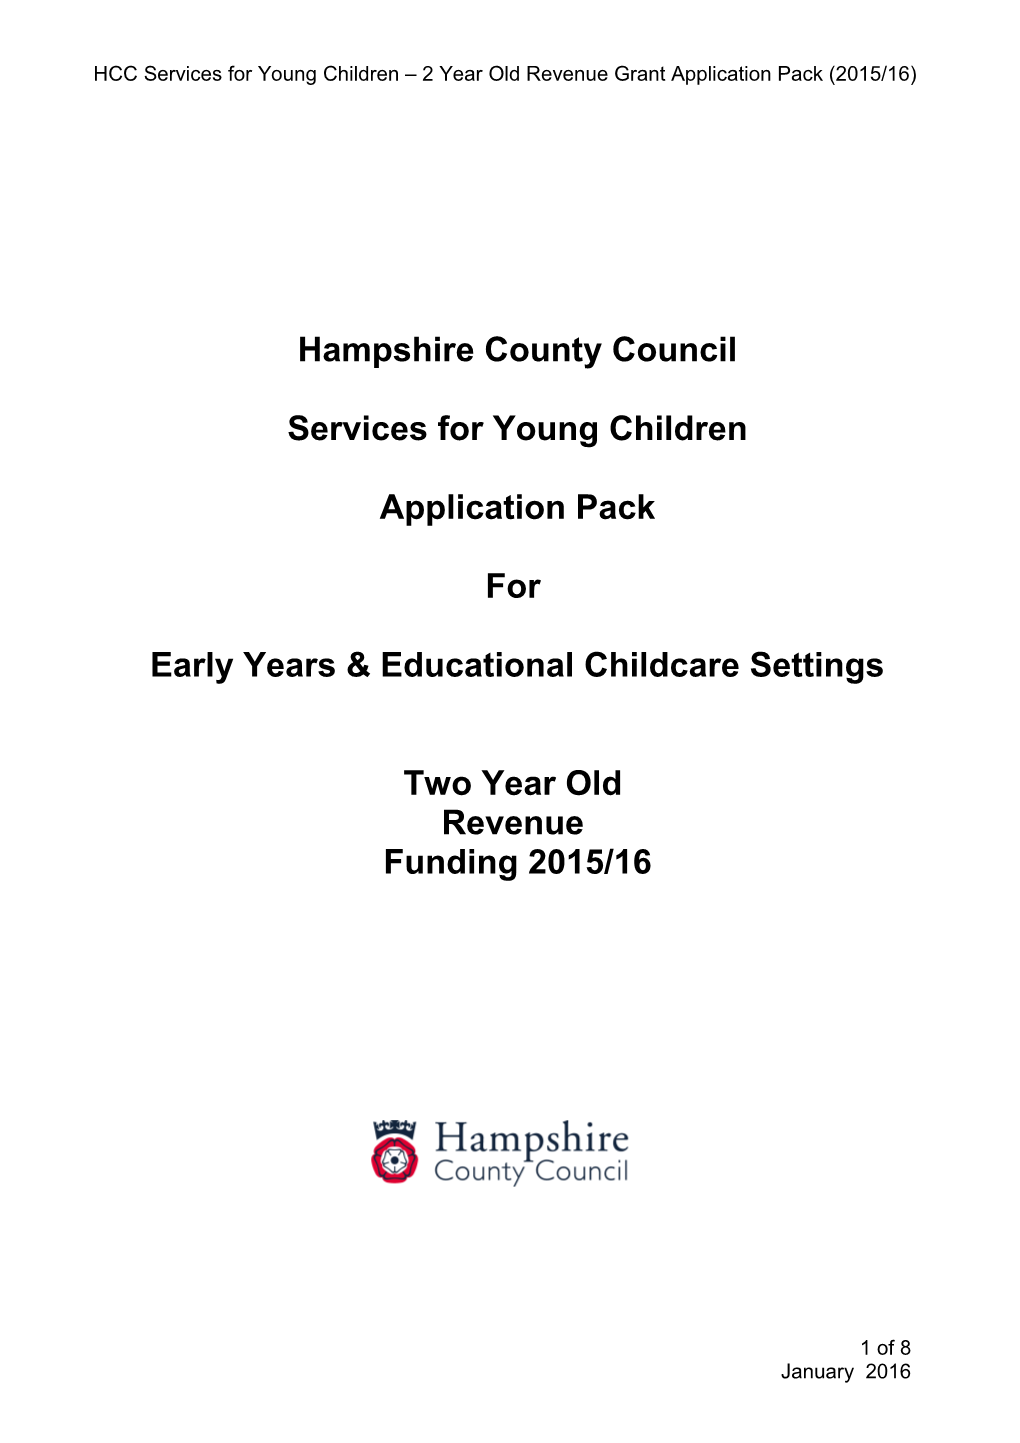 HCC Services for Young Children 2 Year Old Revenue Grant Application Pack (2015/16)